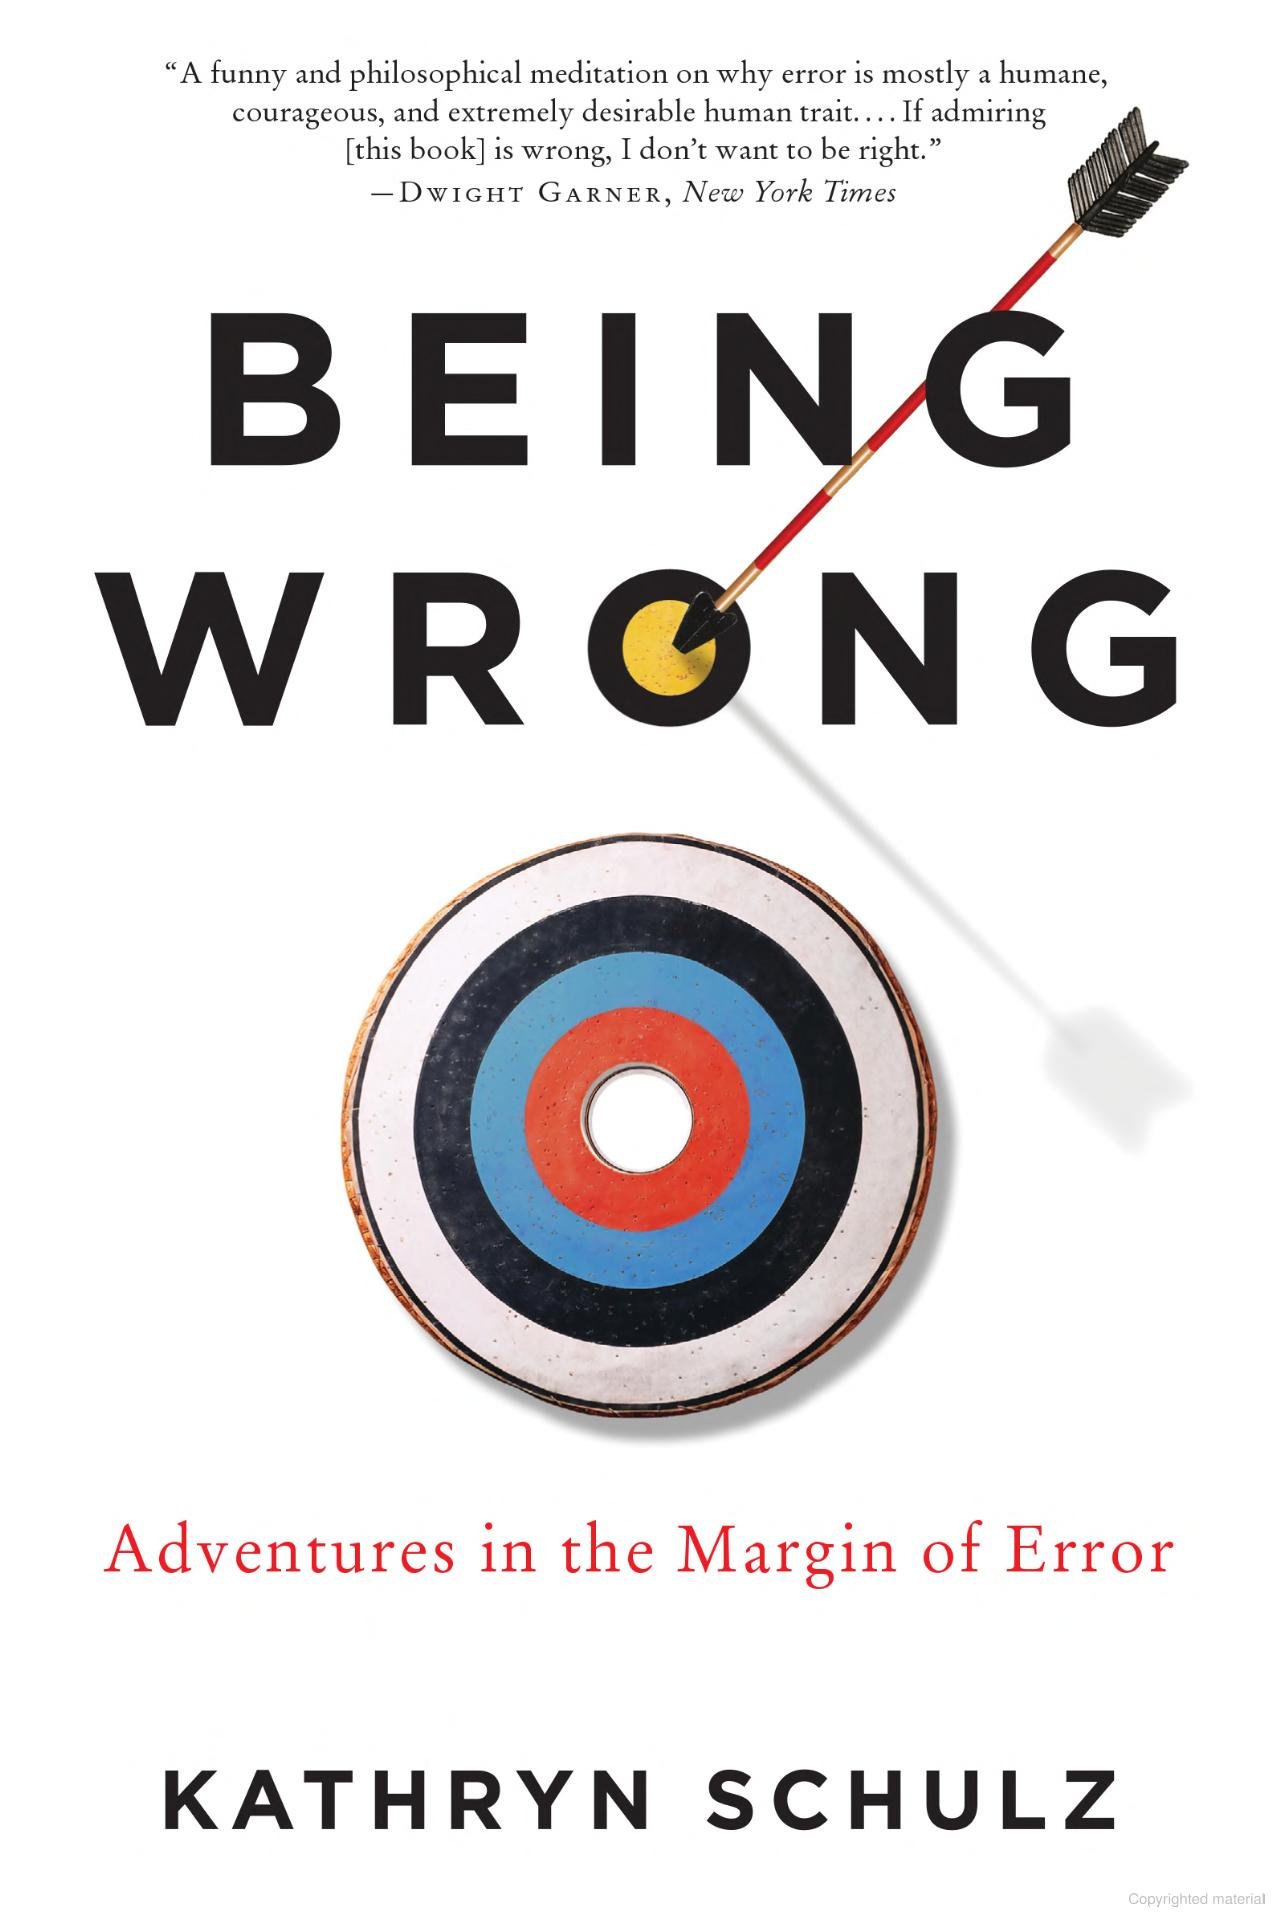 Being Wrong by Kathryn Schulz